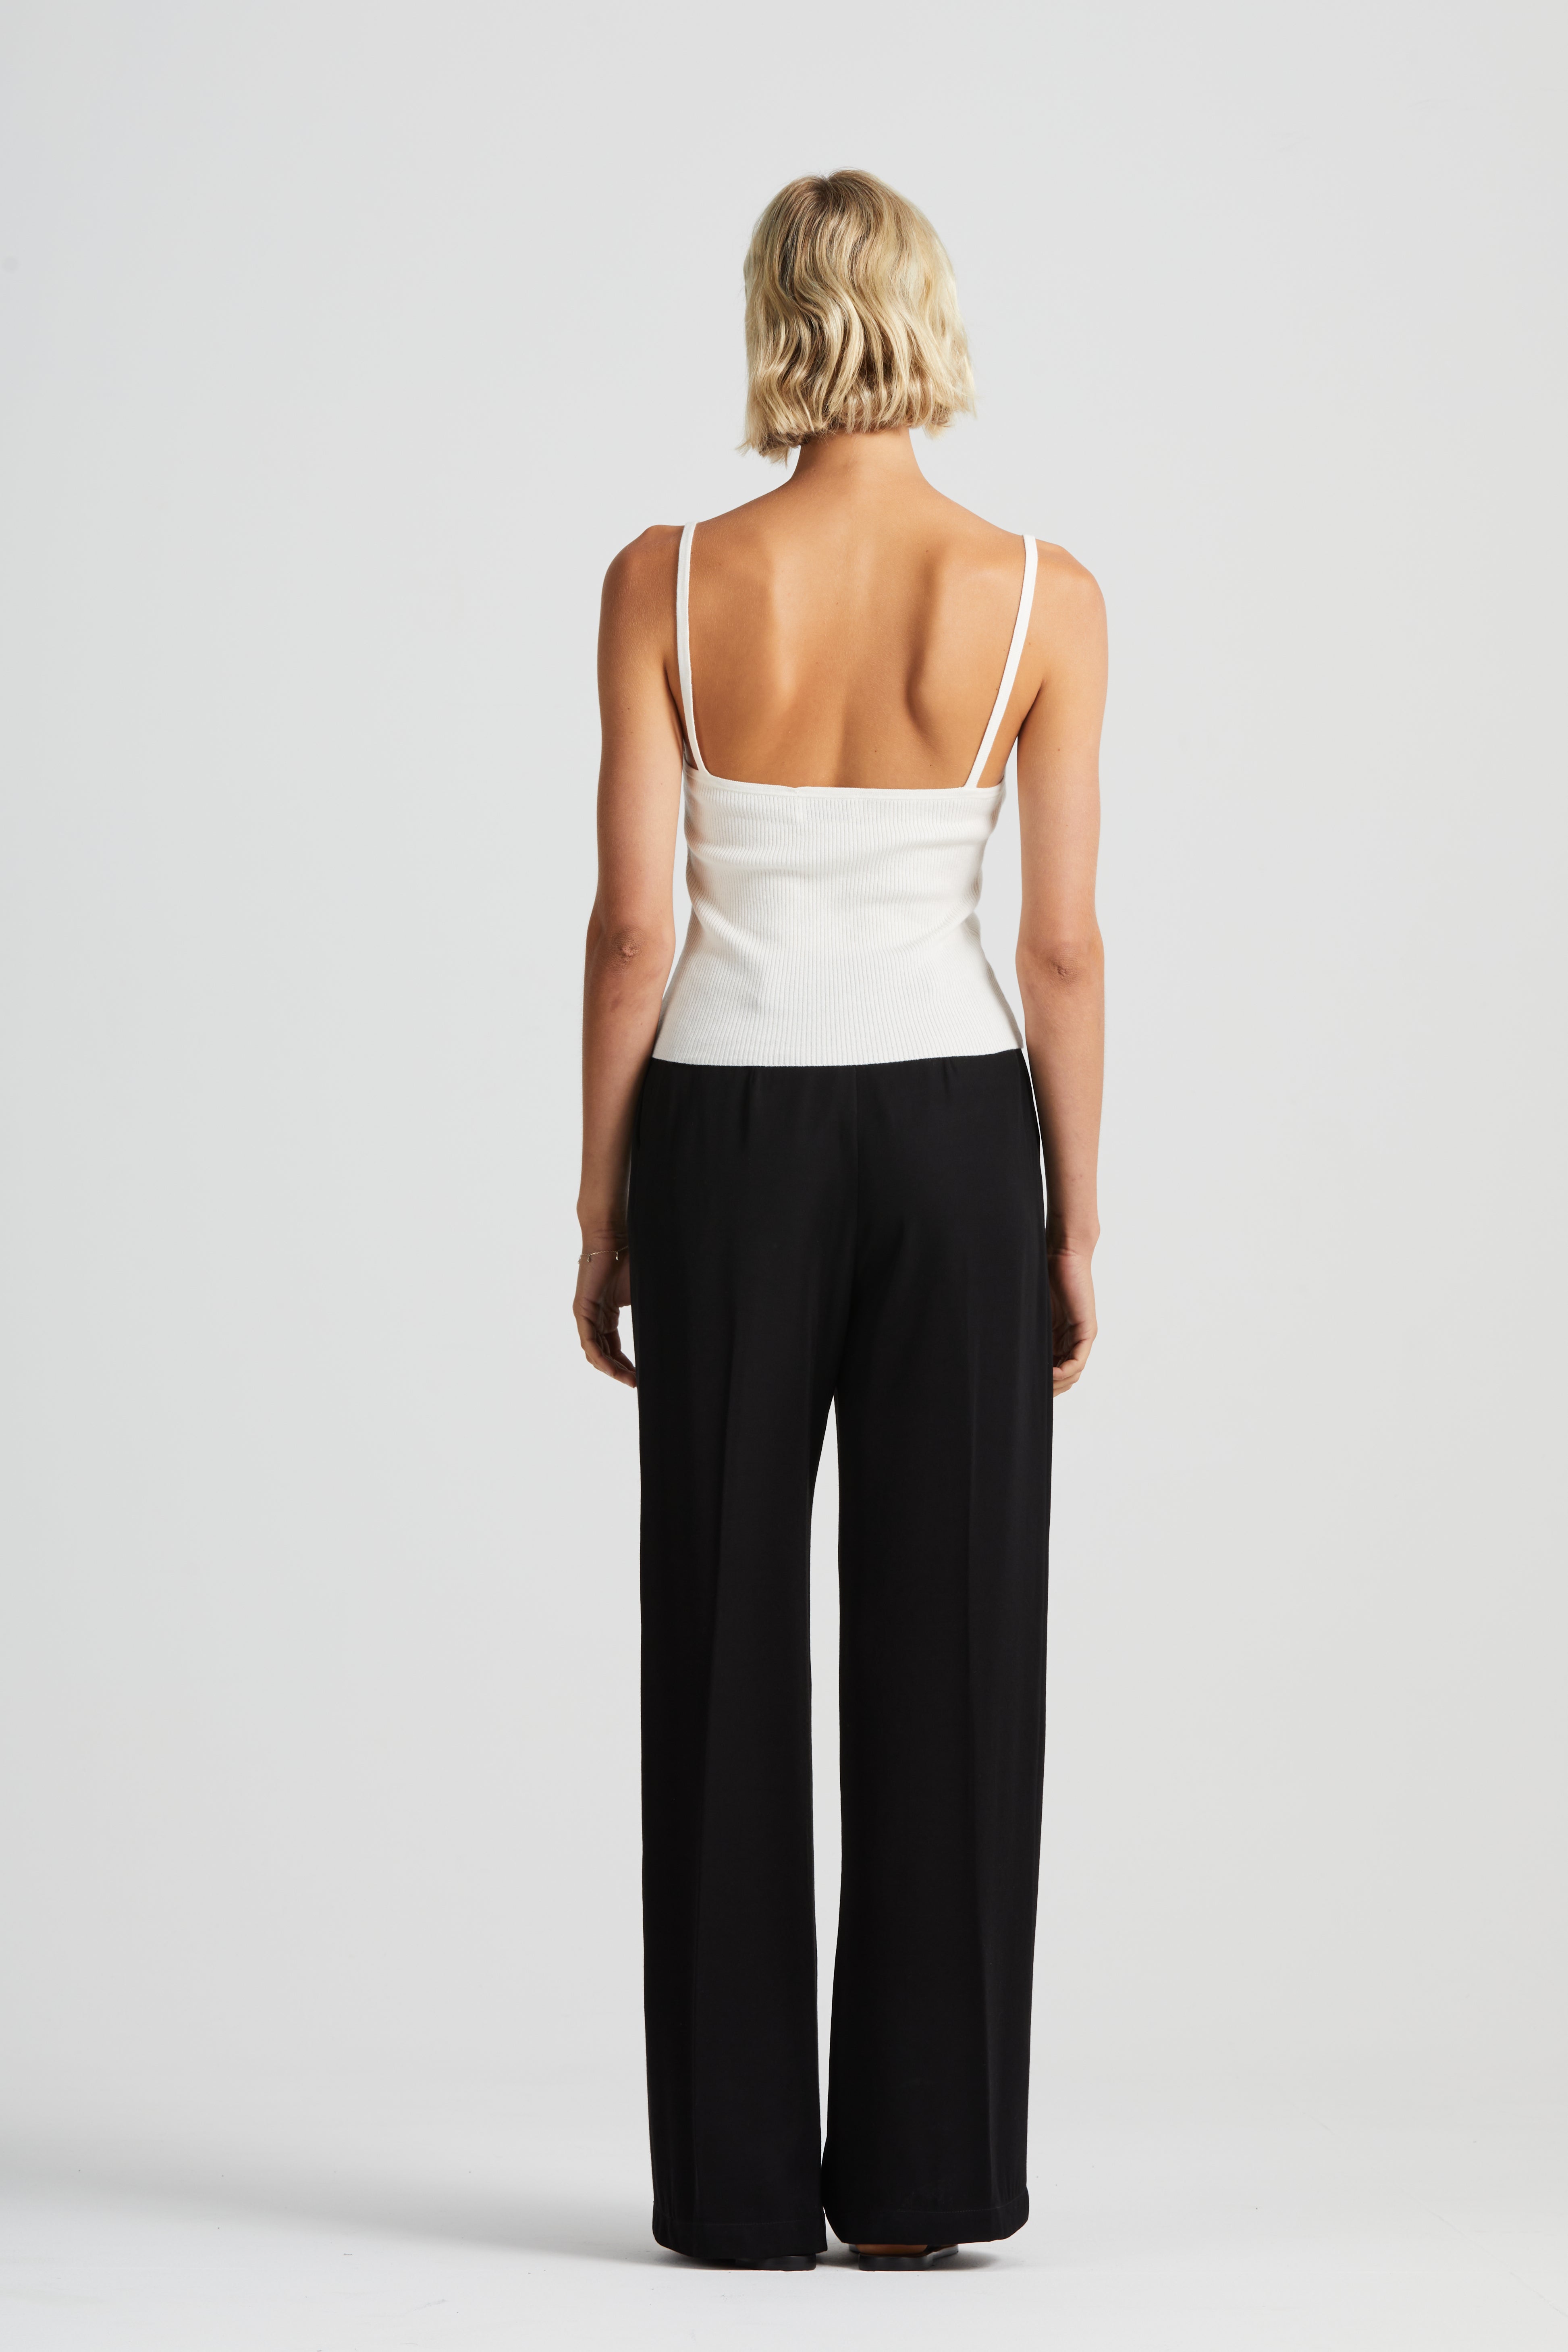 The Cami Knit Top | 2 Colour-ways $175